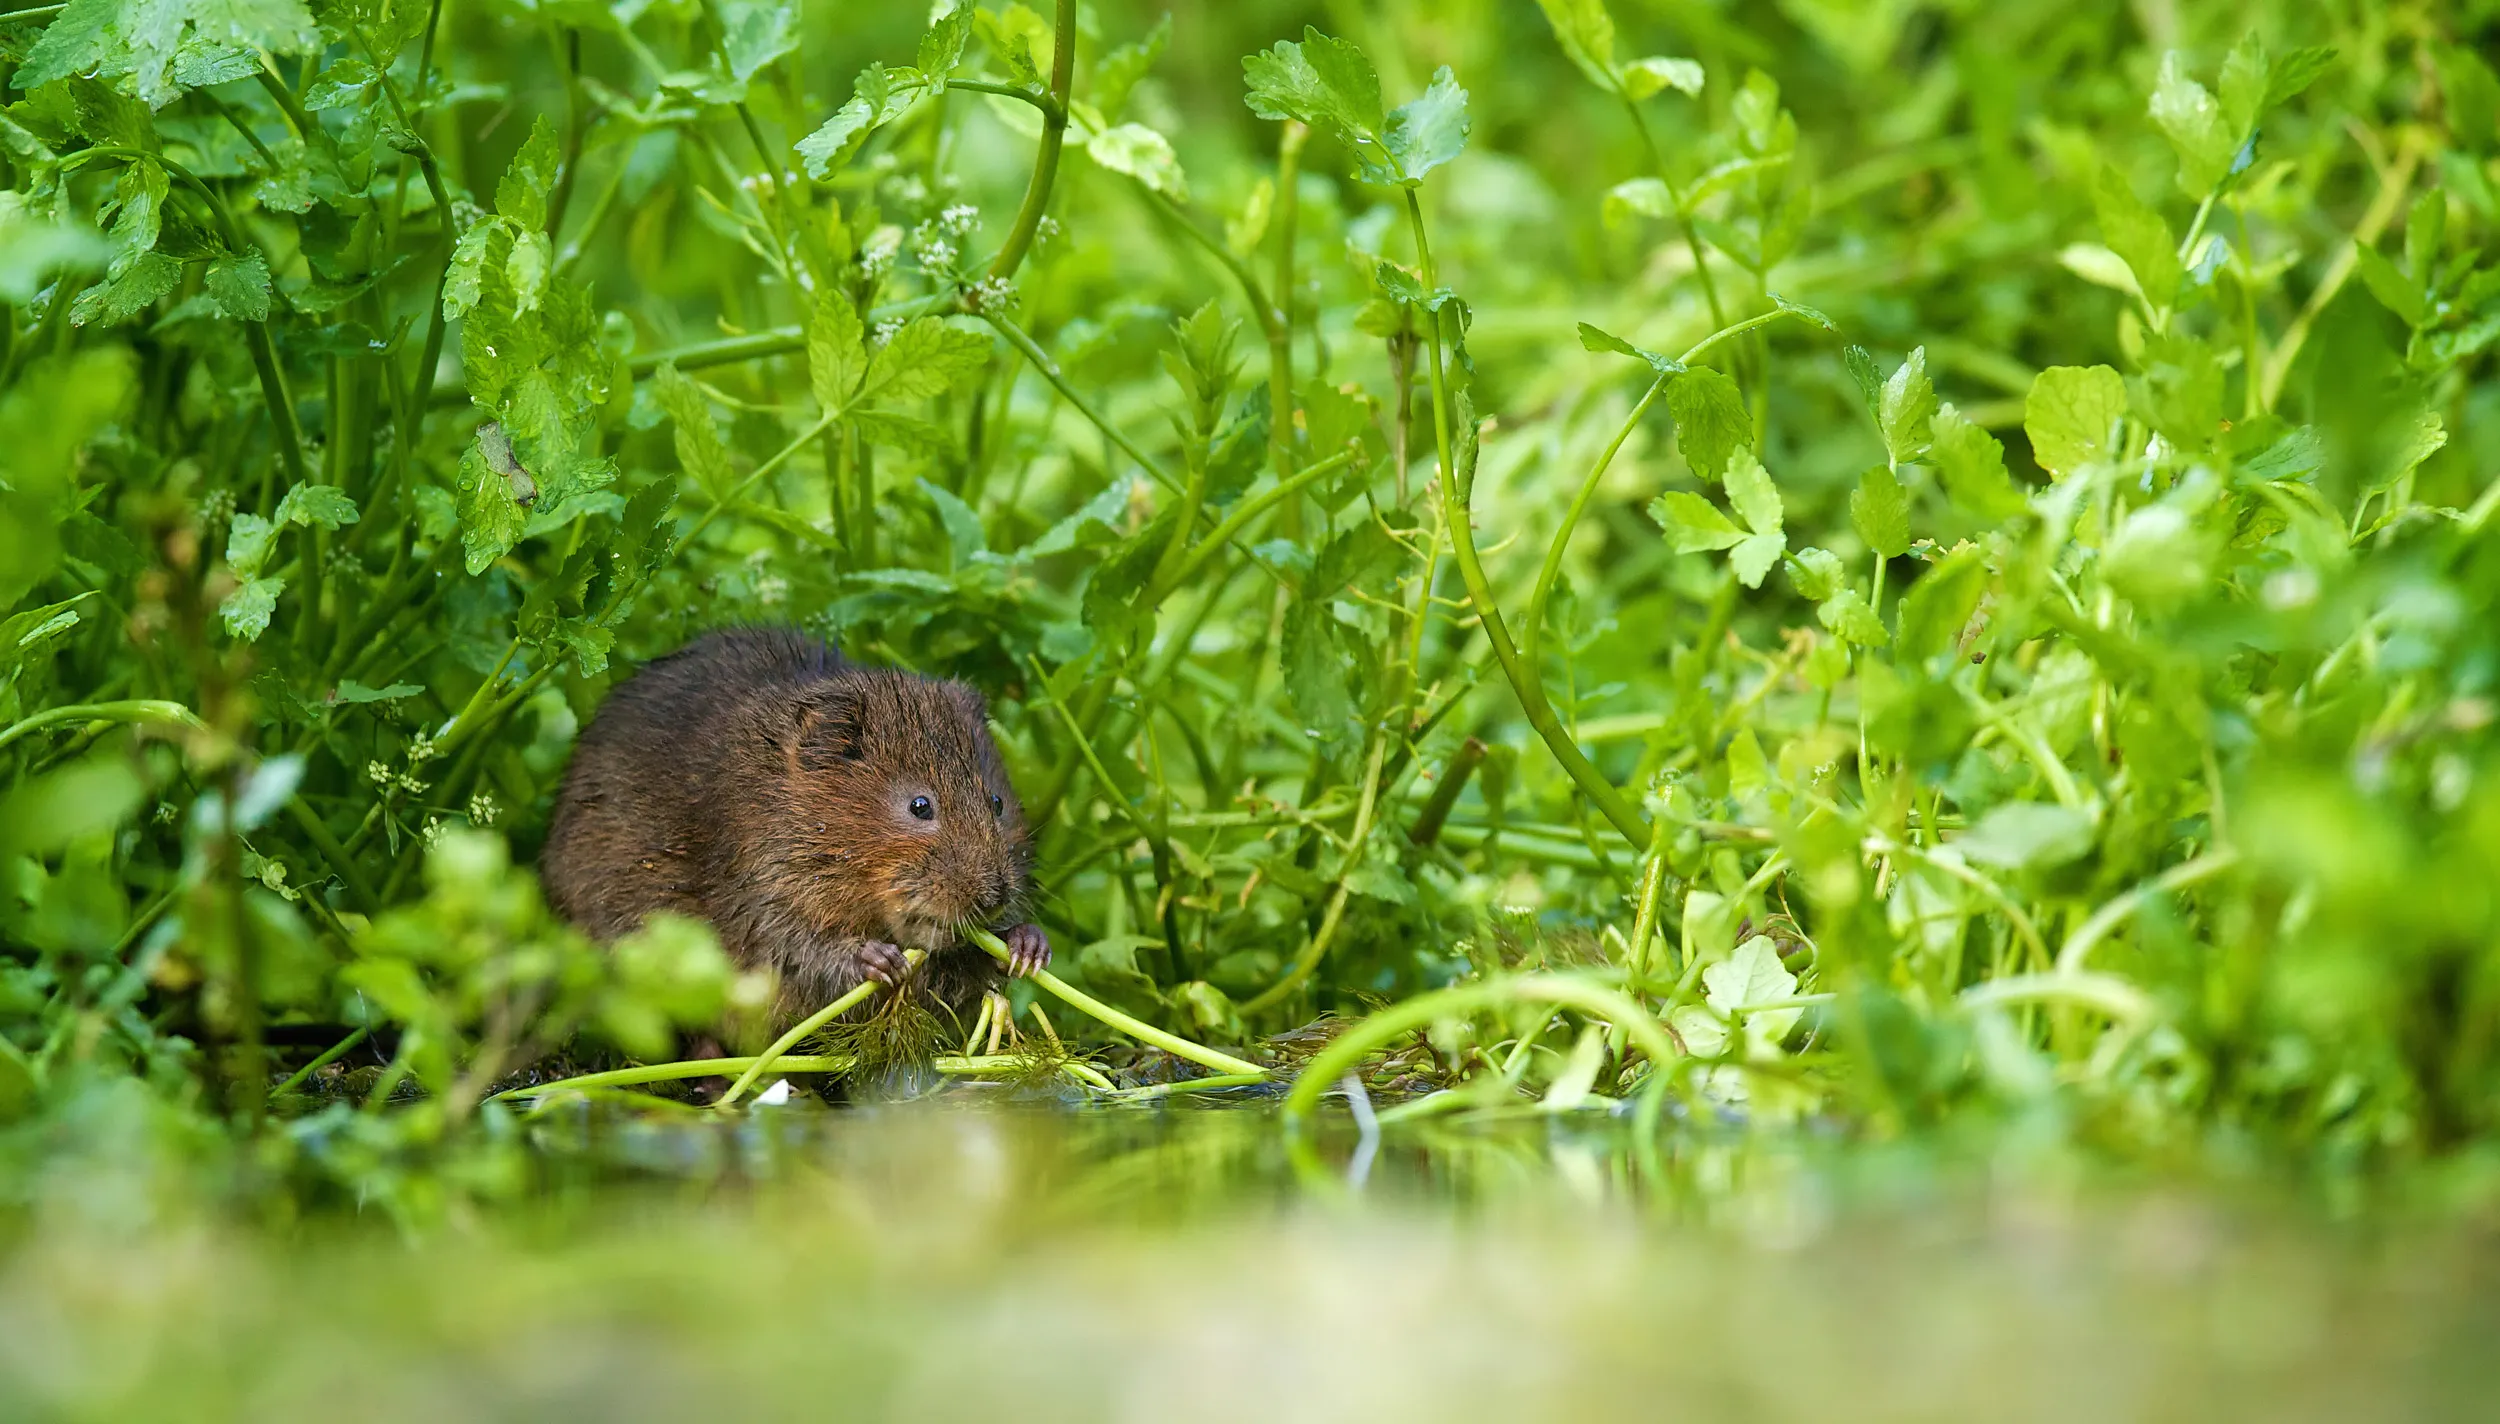 A lone Water Vole appearing through dense greenery, eating leaves.